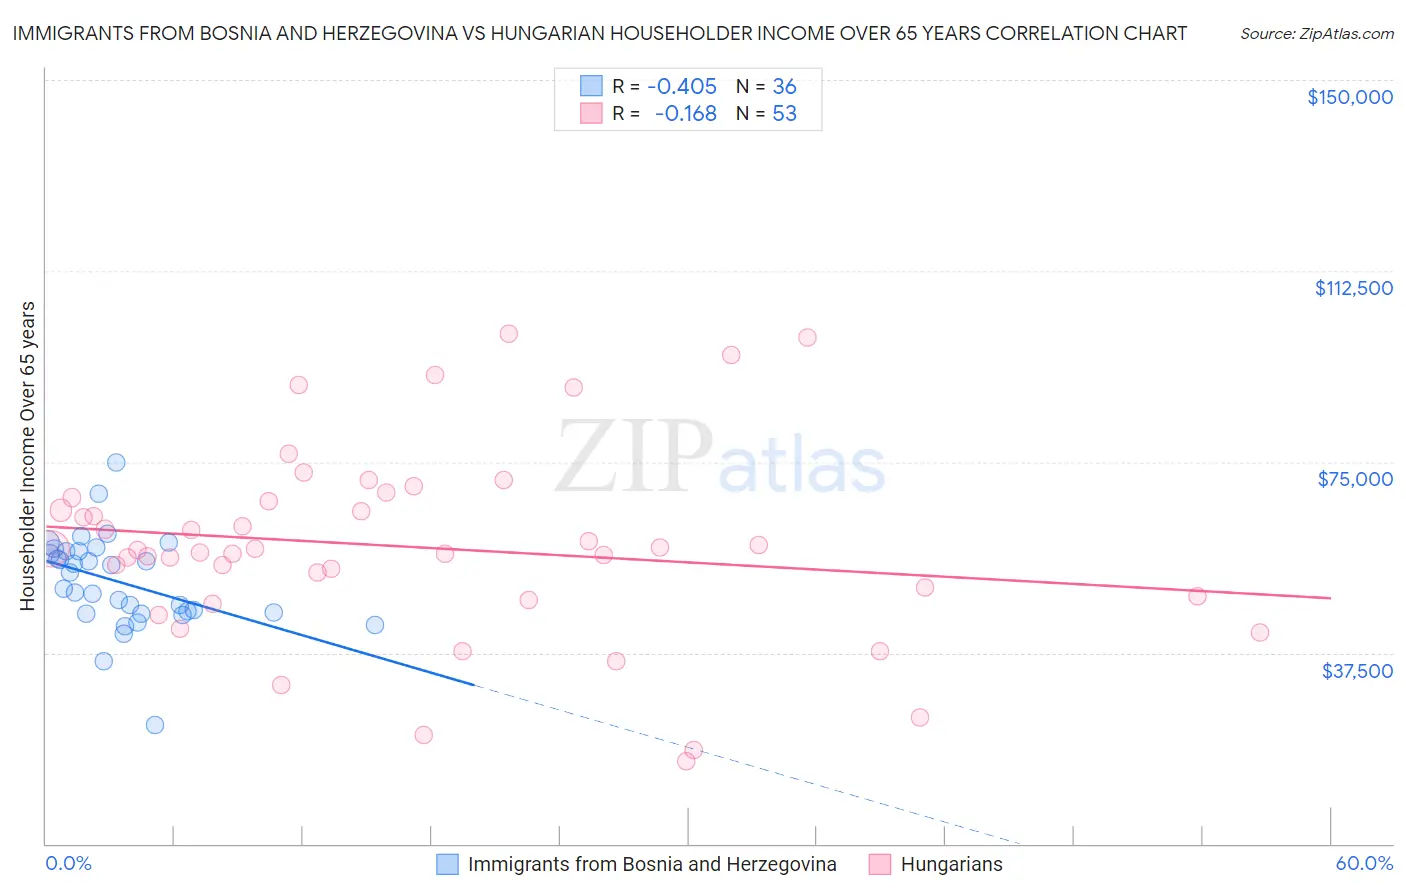 Immigrants from Bosnia and Herzegovina vs Hungarian Householder Income Over 65 years